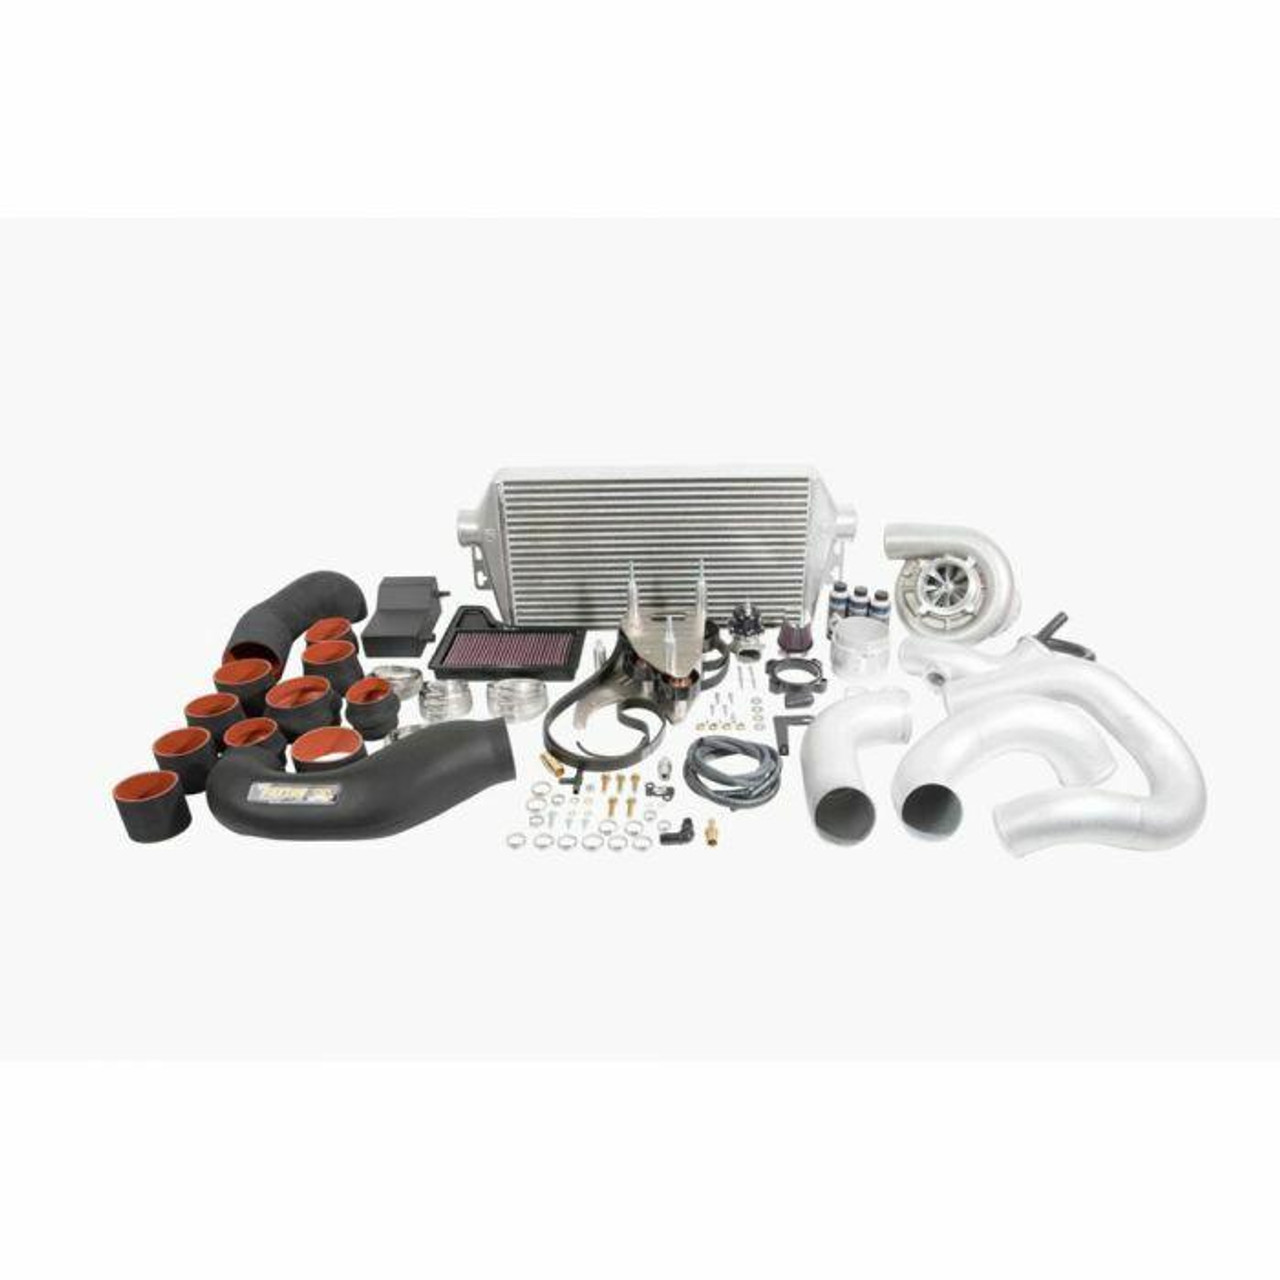 Paxton Paxton Supercharger Mustang GT Tuner Kit NOVI 2200SL With Air To Air Cooler Satin 2011-2014